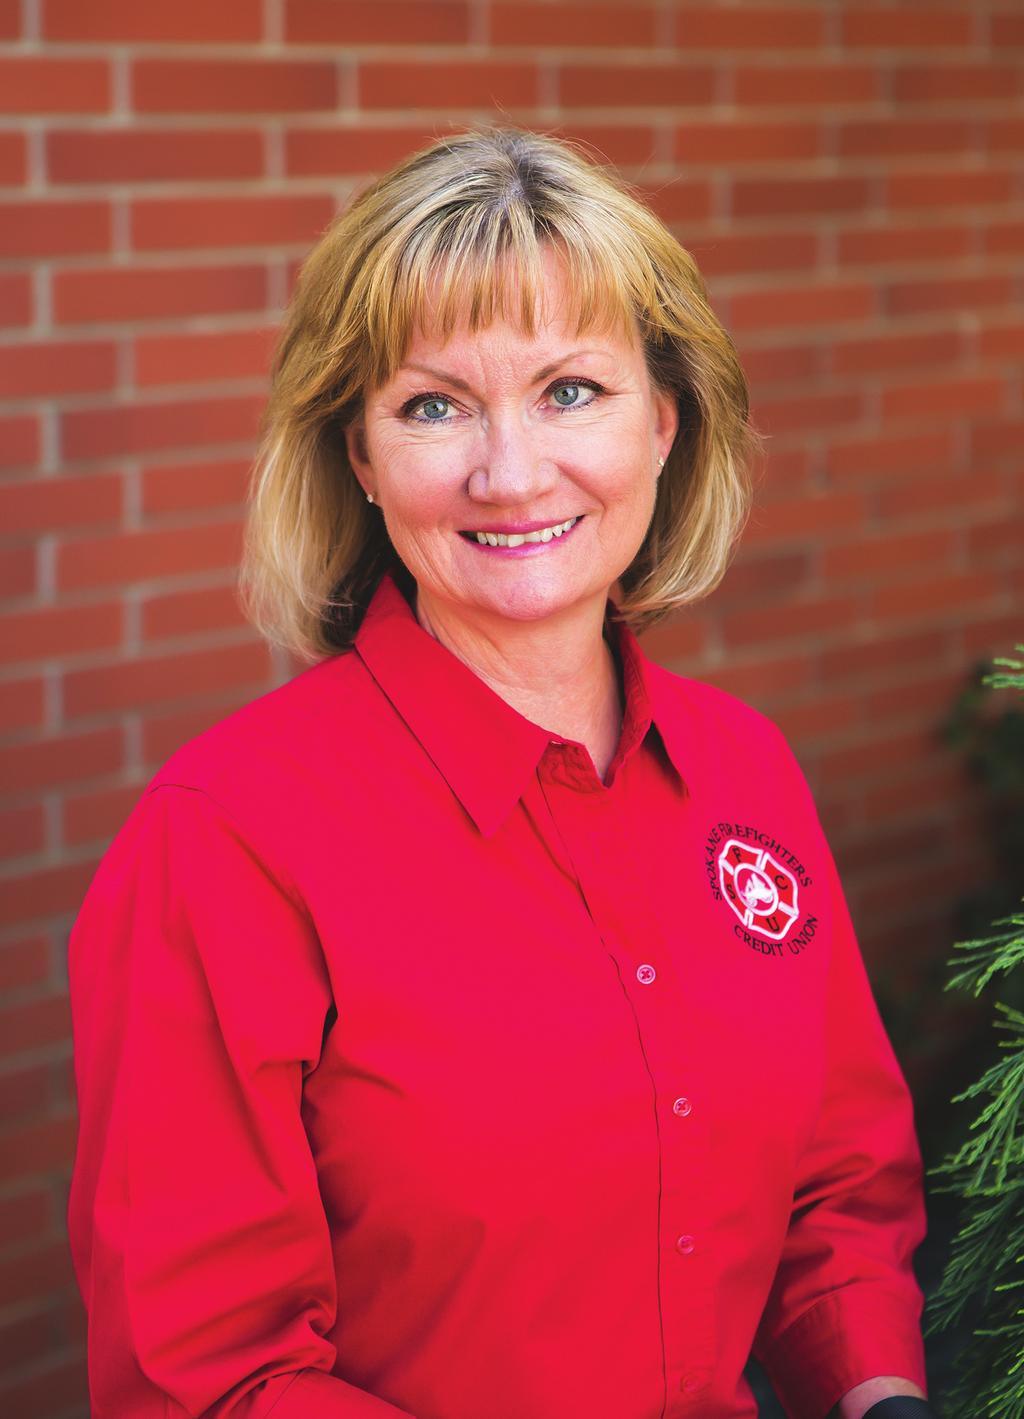 SERVING SPOKANE FIREFIGHTERS SINCE 1934 From Your CEO Gayle Furness President/CEO It has been an exciting and successful 2017 for Spokane Firefighters Credit Union.